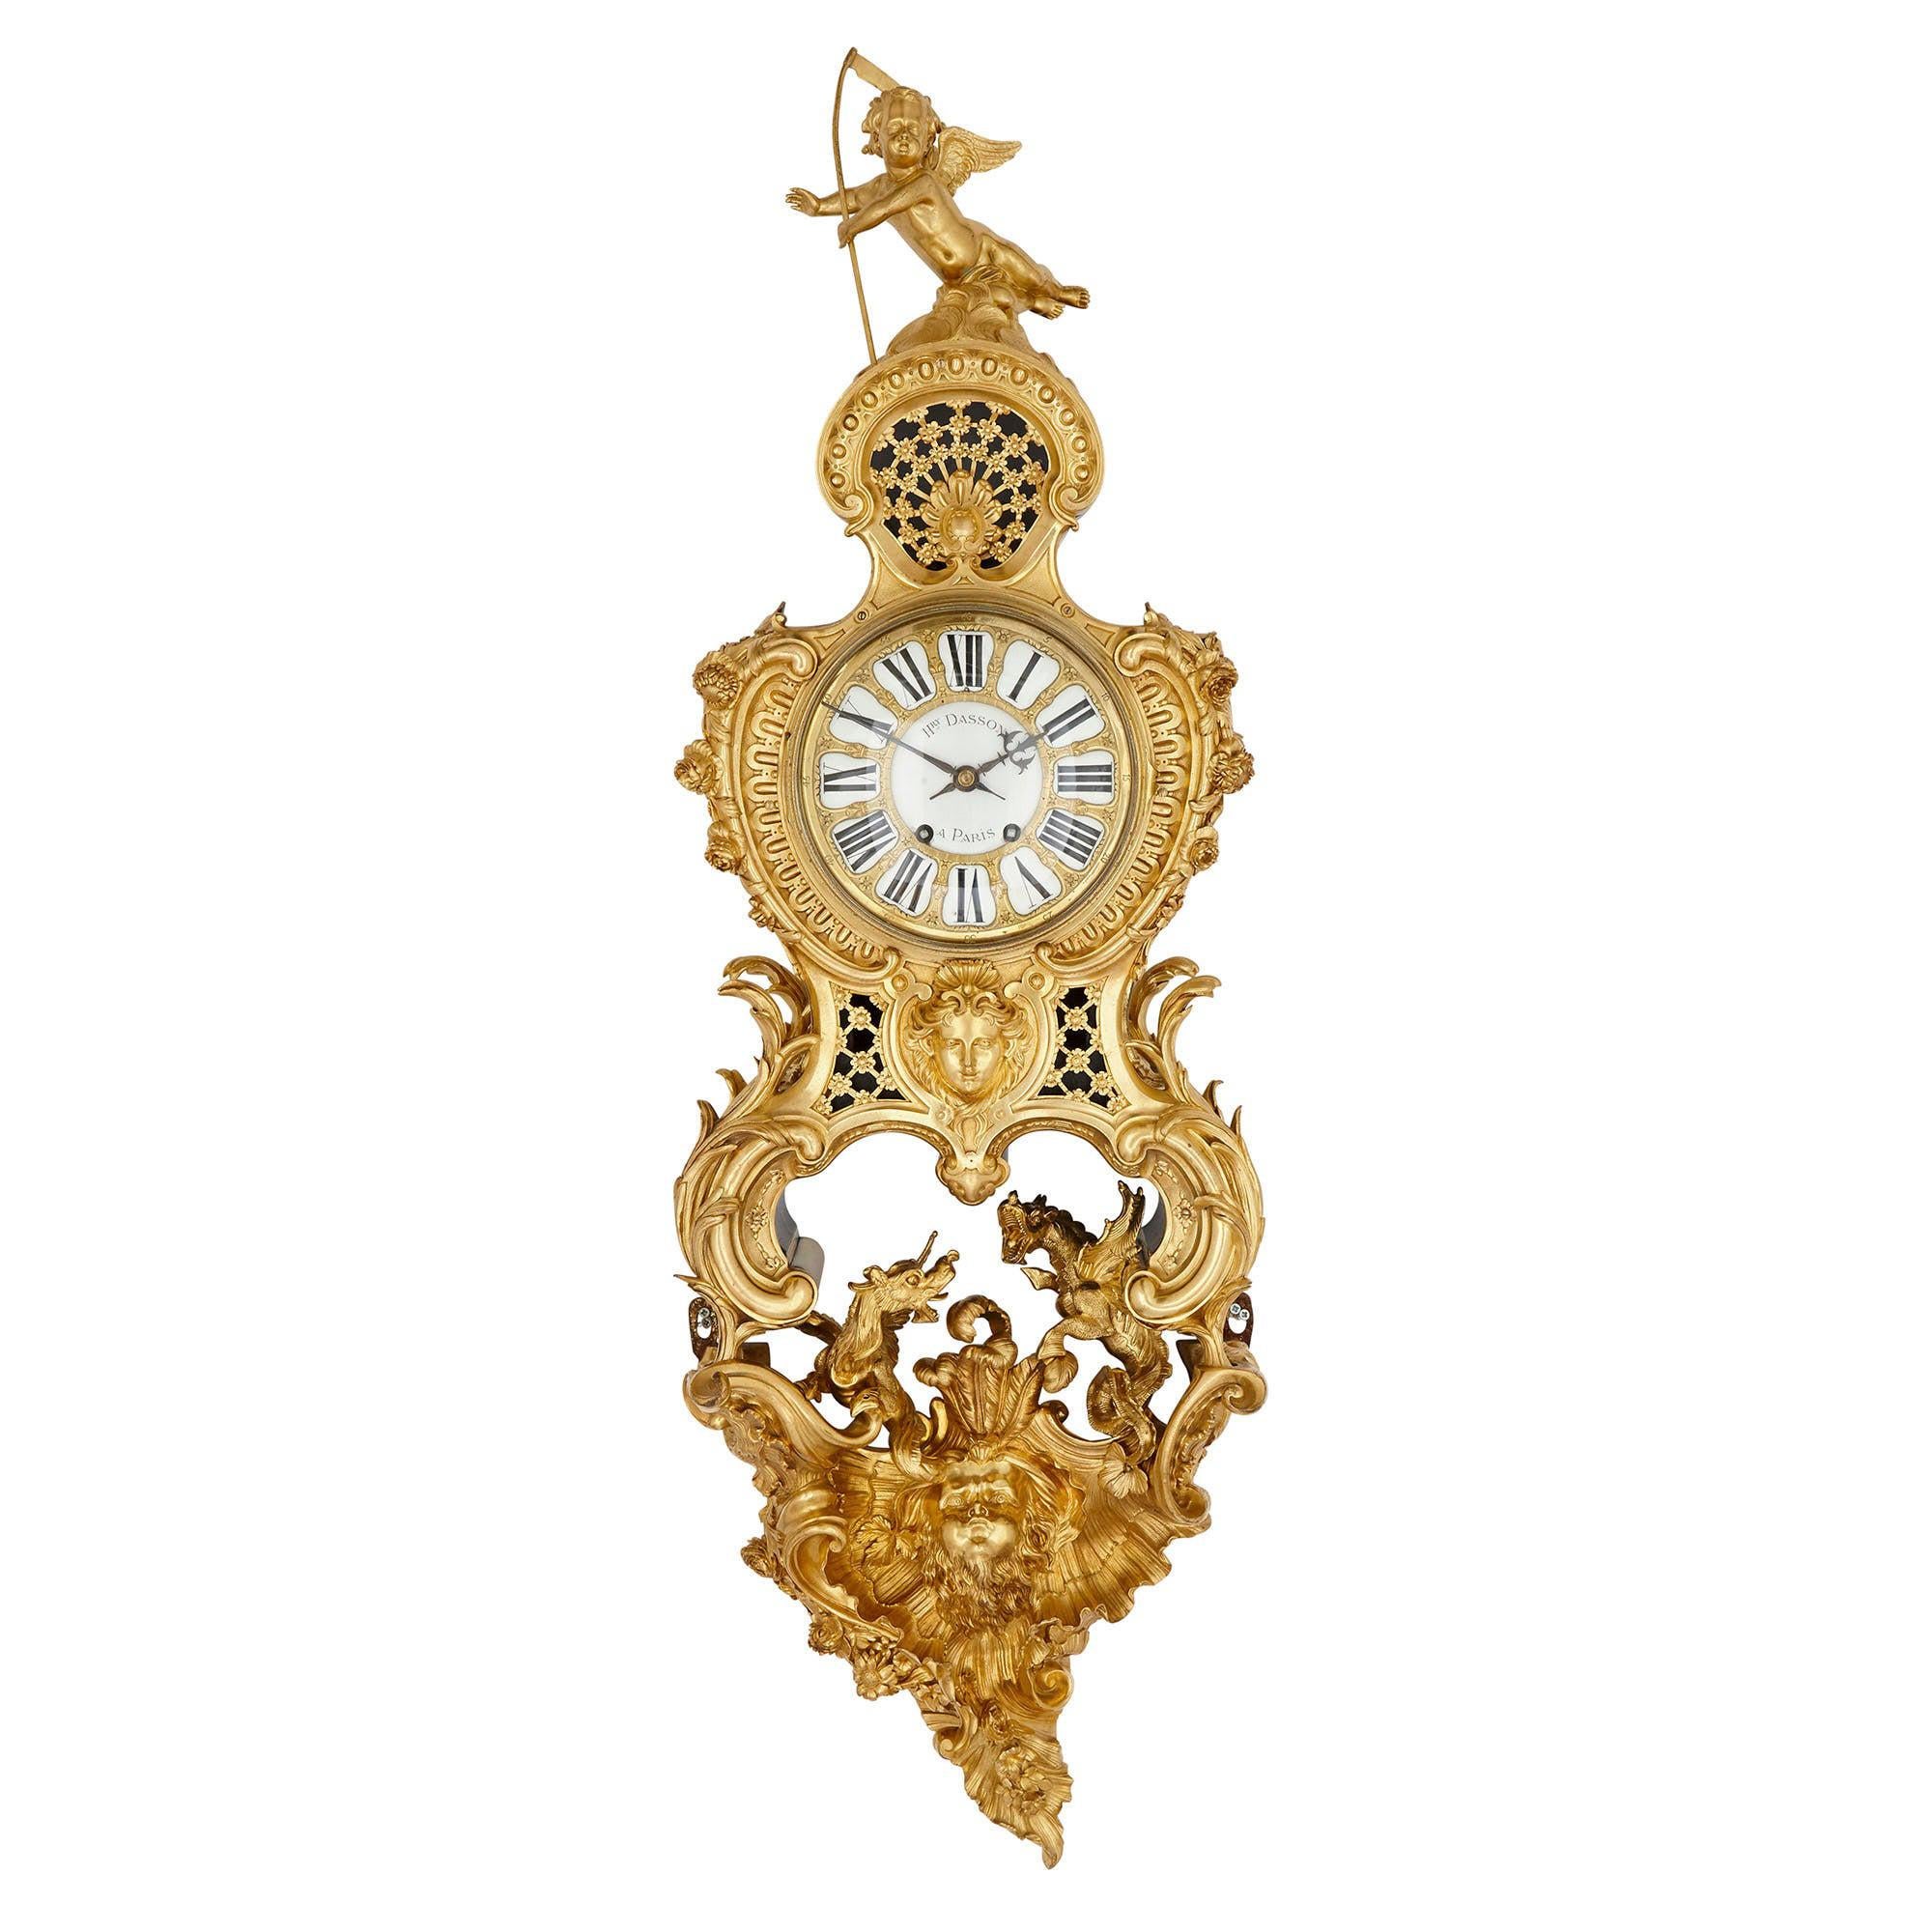 Antique French Belle Époque Rococo Style Bracket Clock by Henry Dasson